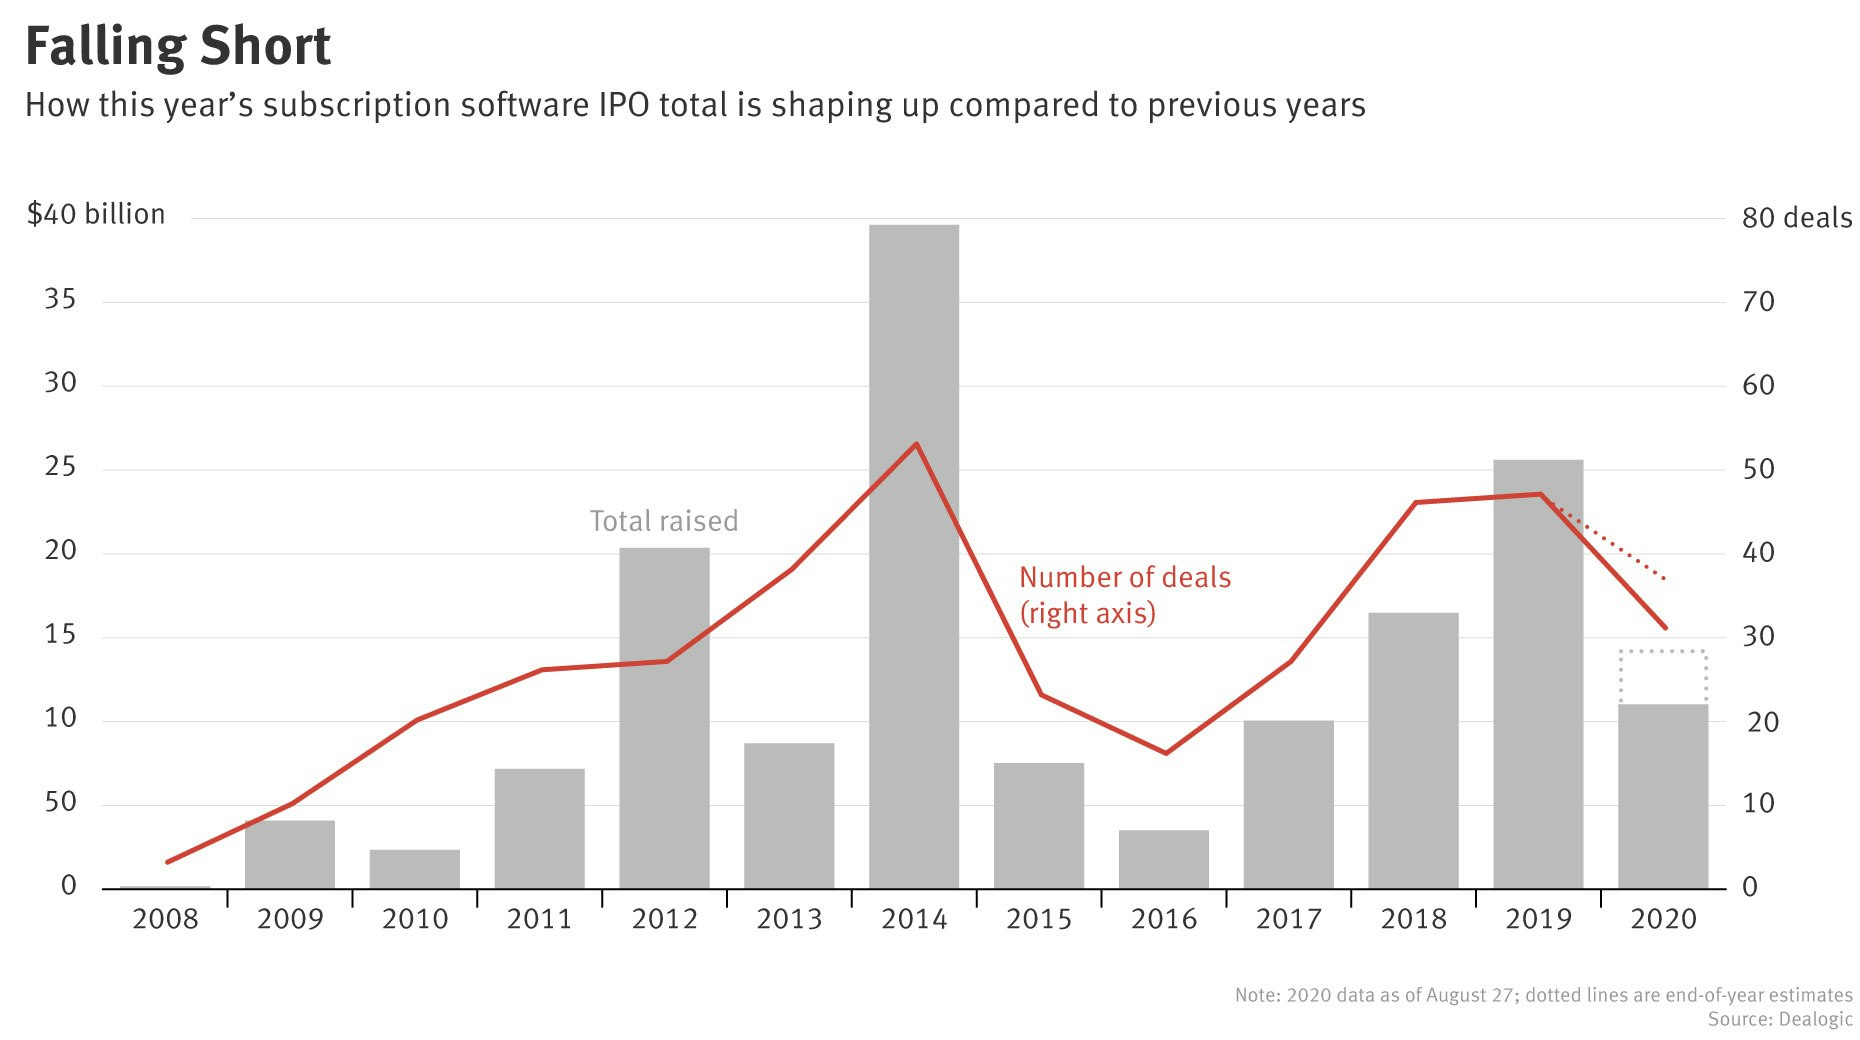 Despite Flurry Of Activity Software Ipos To Fall Short Of 2019 Numbers